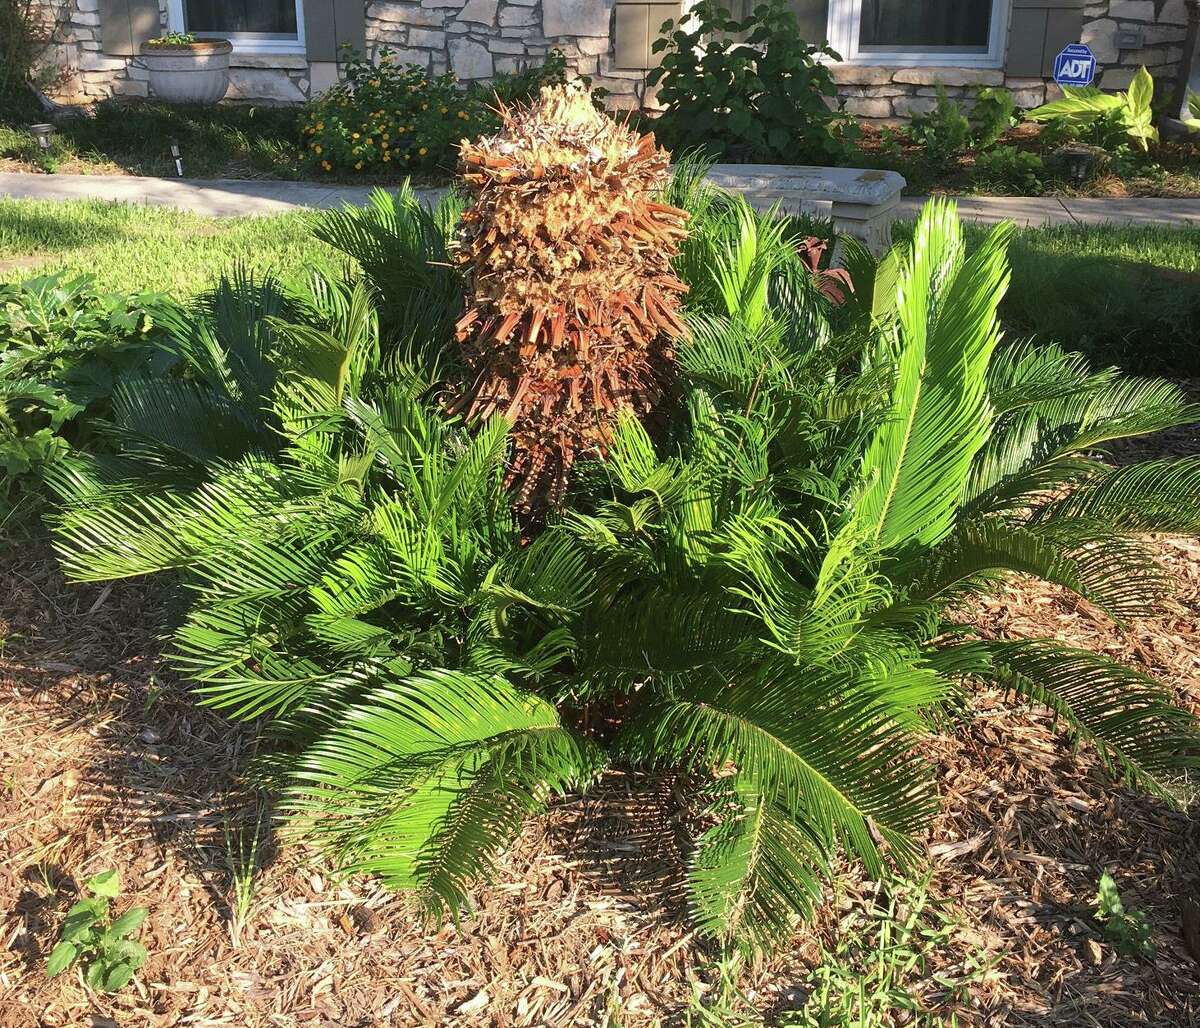 While the roots of this sago palm survived, the center stalk was killed and should be taken out before there's too much new growth to damage in the process.